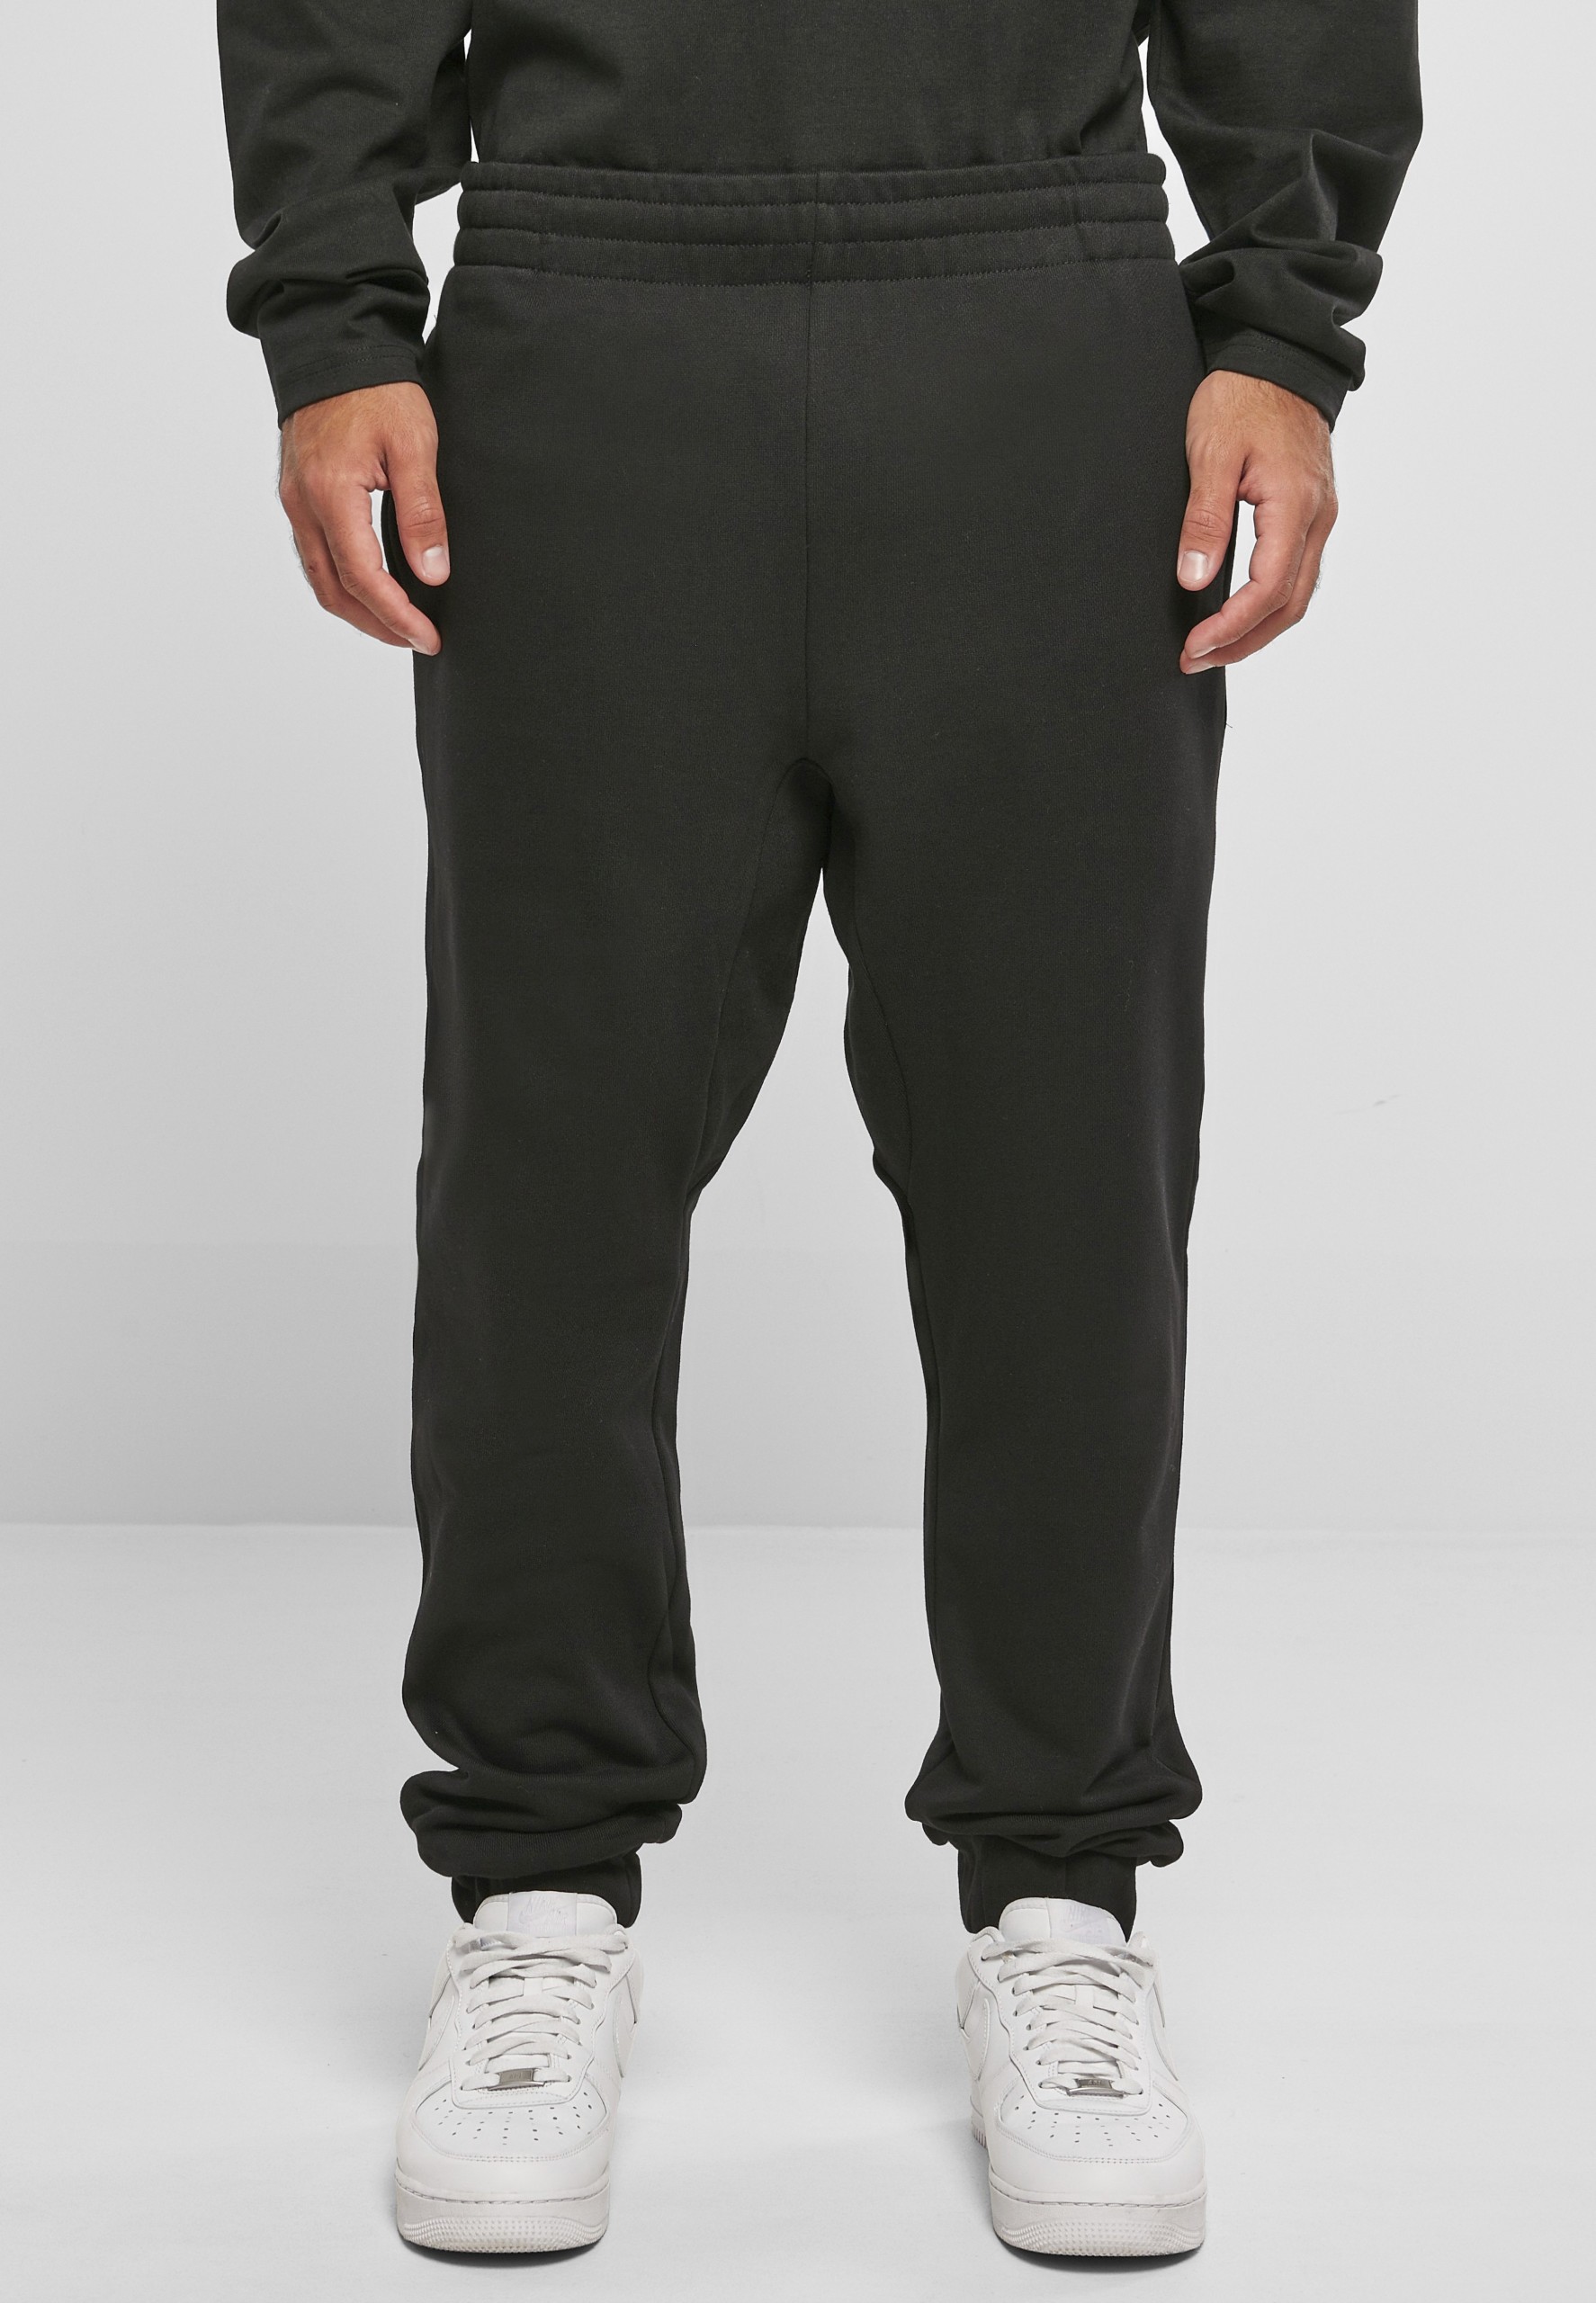 Build Your Brand - Build Your Brand - Men´s Ultra Heavy Sweatpants - BY245